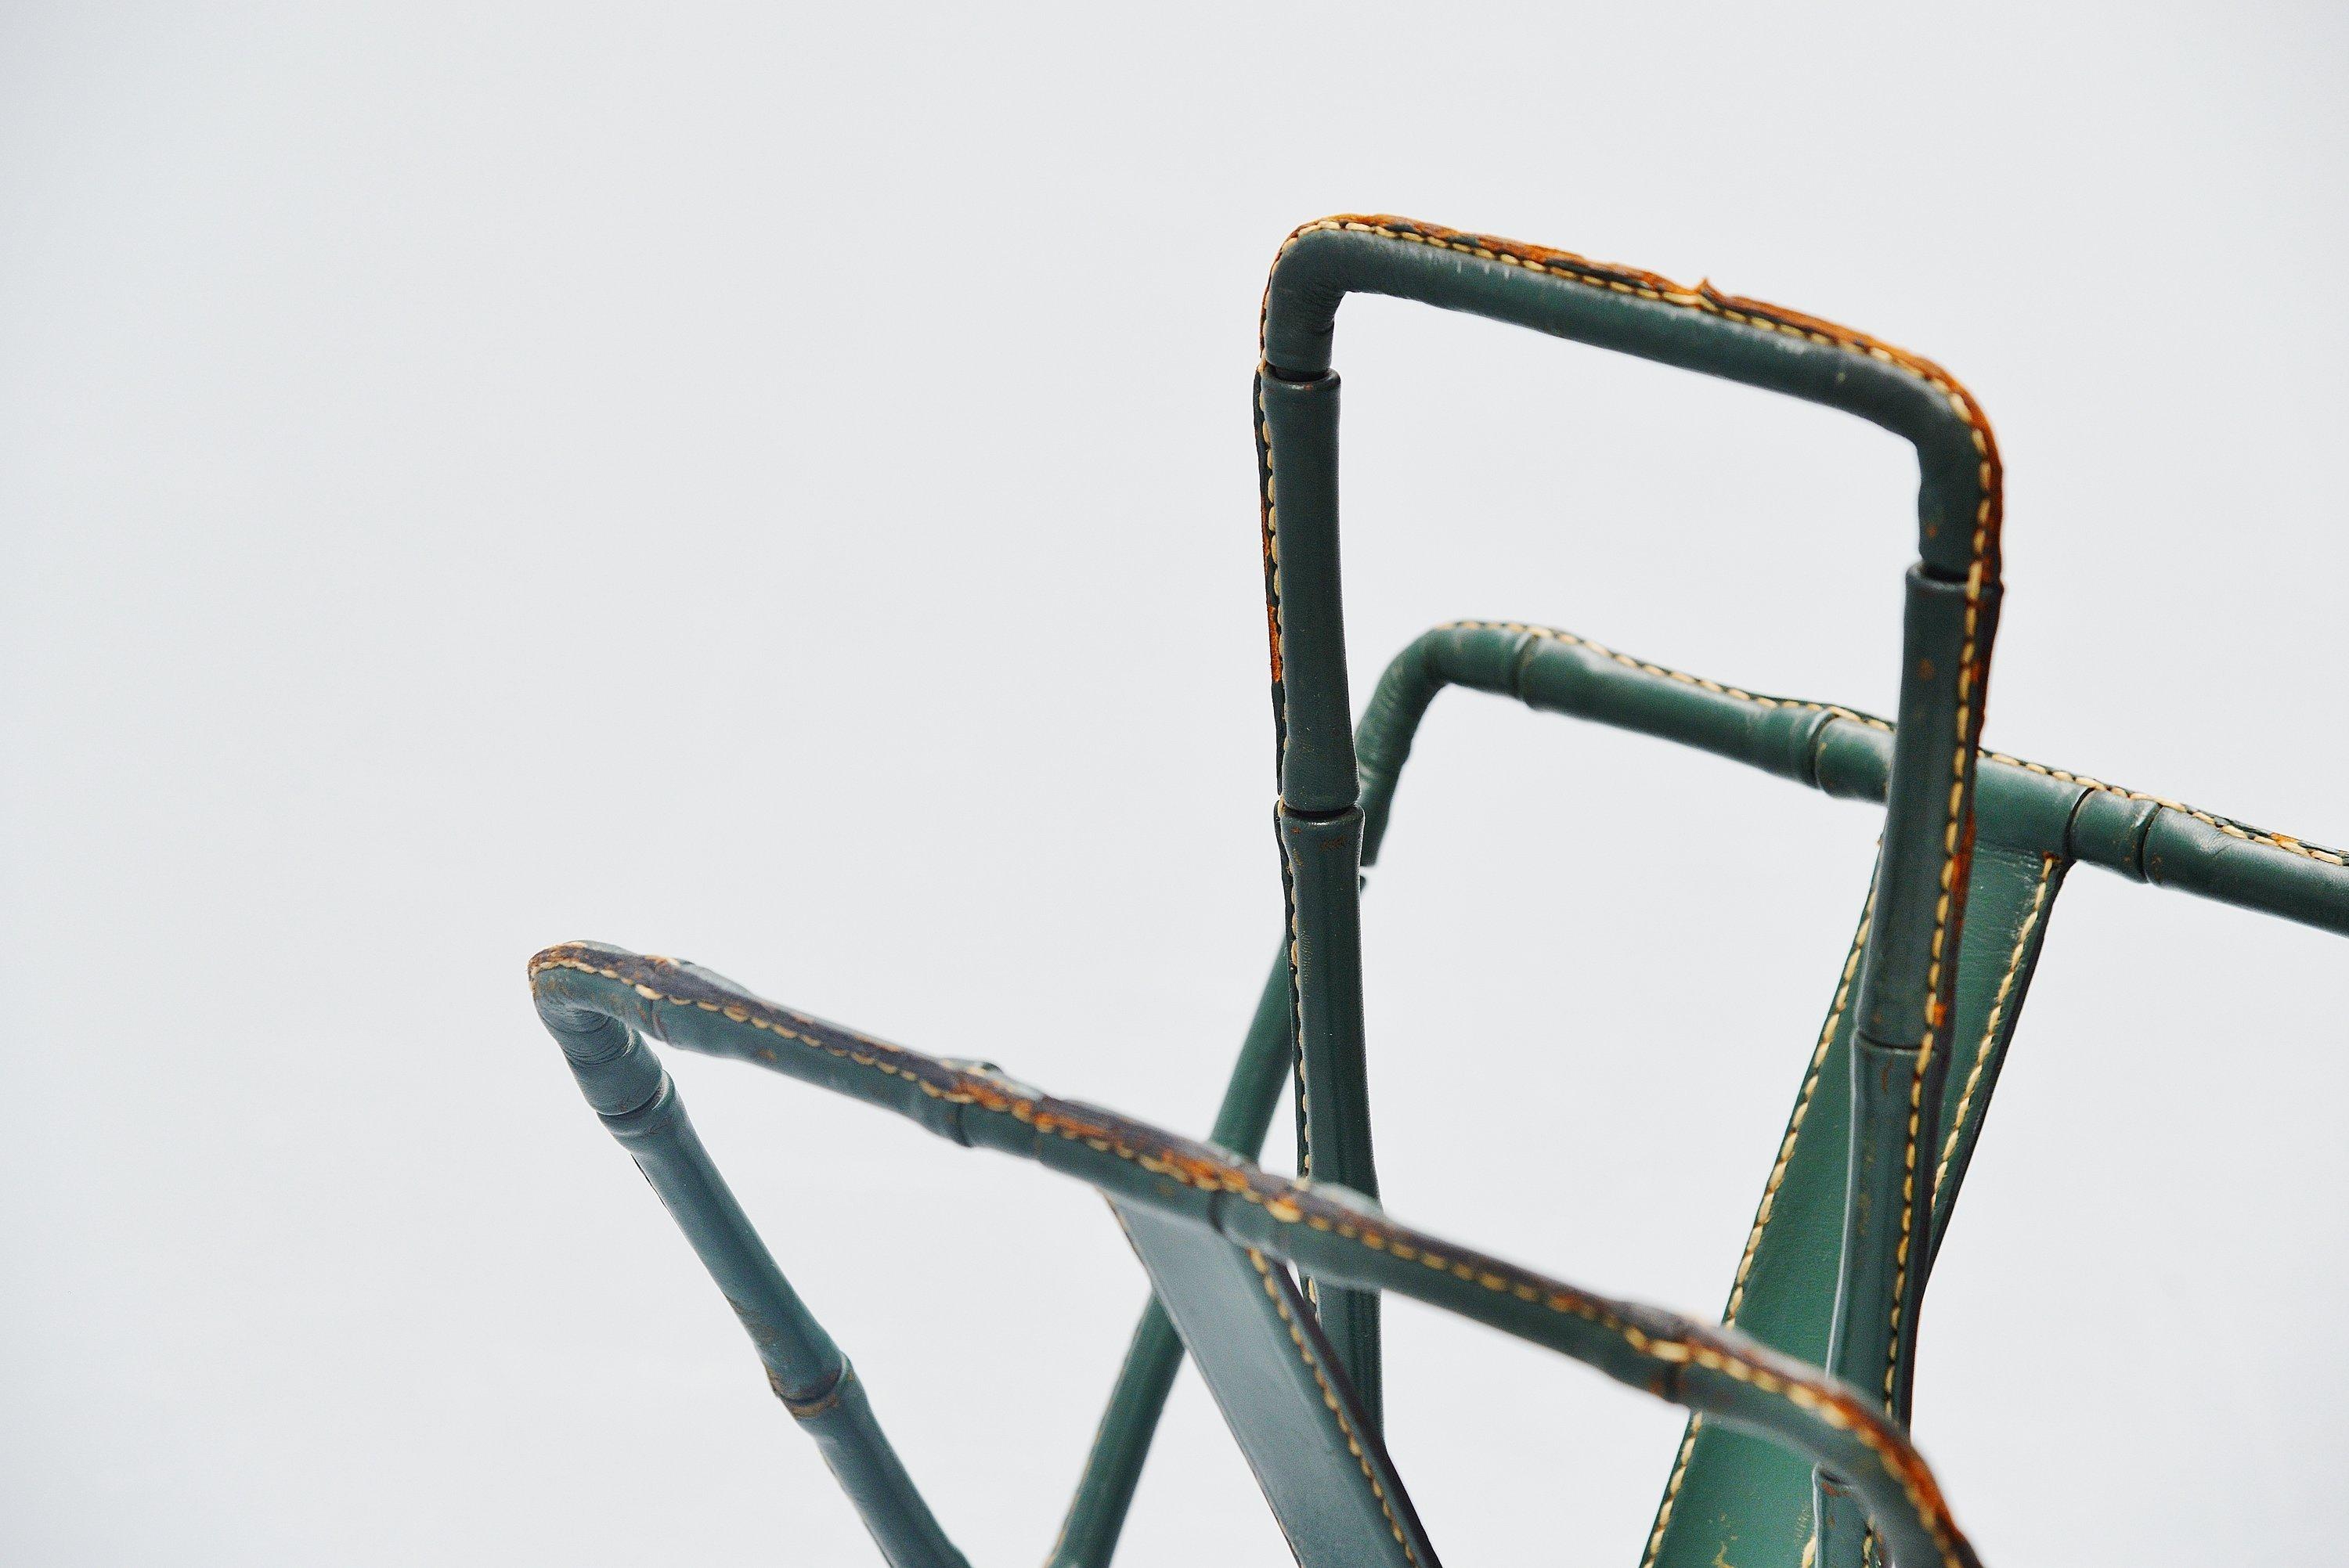 Magazine stand designed by Jacques Adnet and manufactured in his own atelier, France, 1950. The magazine stand has a solid brass frame and is fully covered with handstitched green leather. The stand has a nice patina from age and usage, and is fully